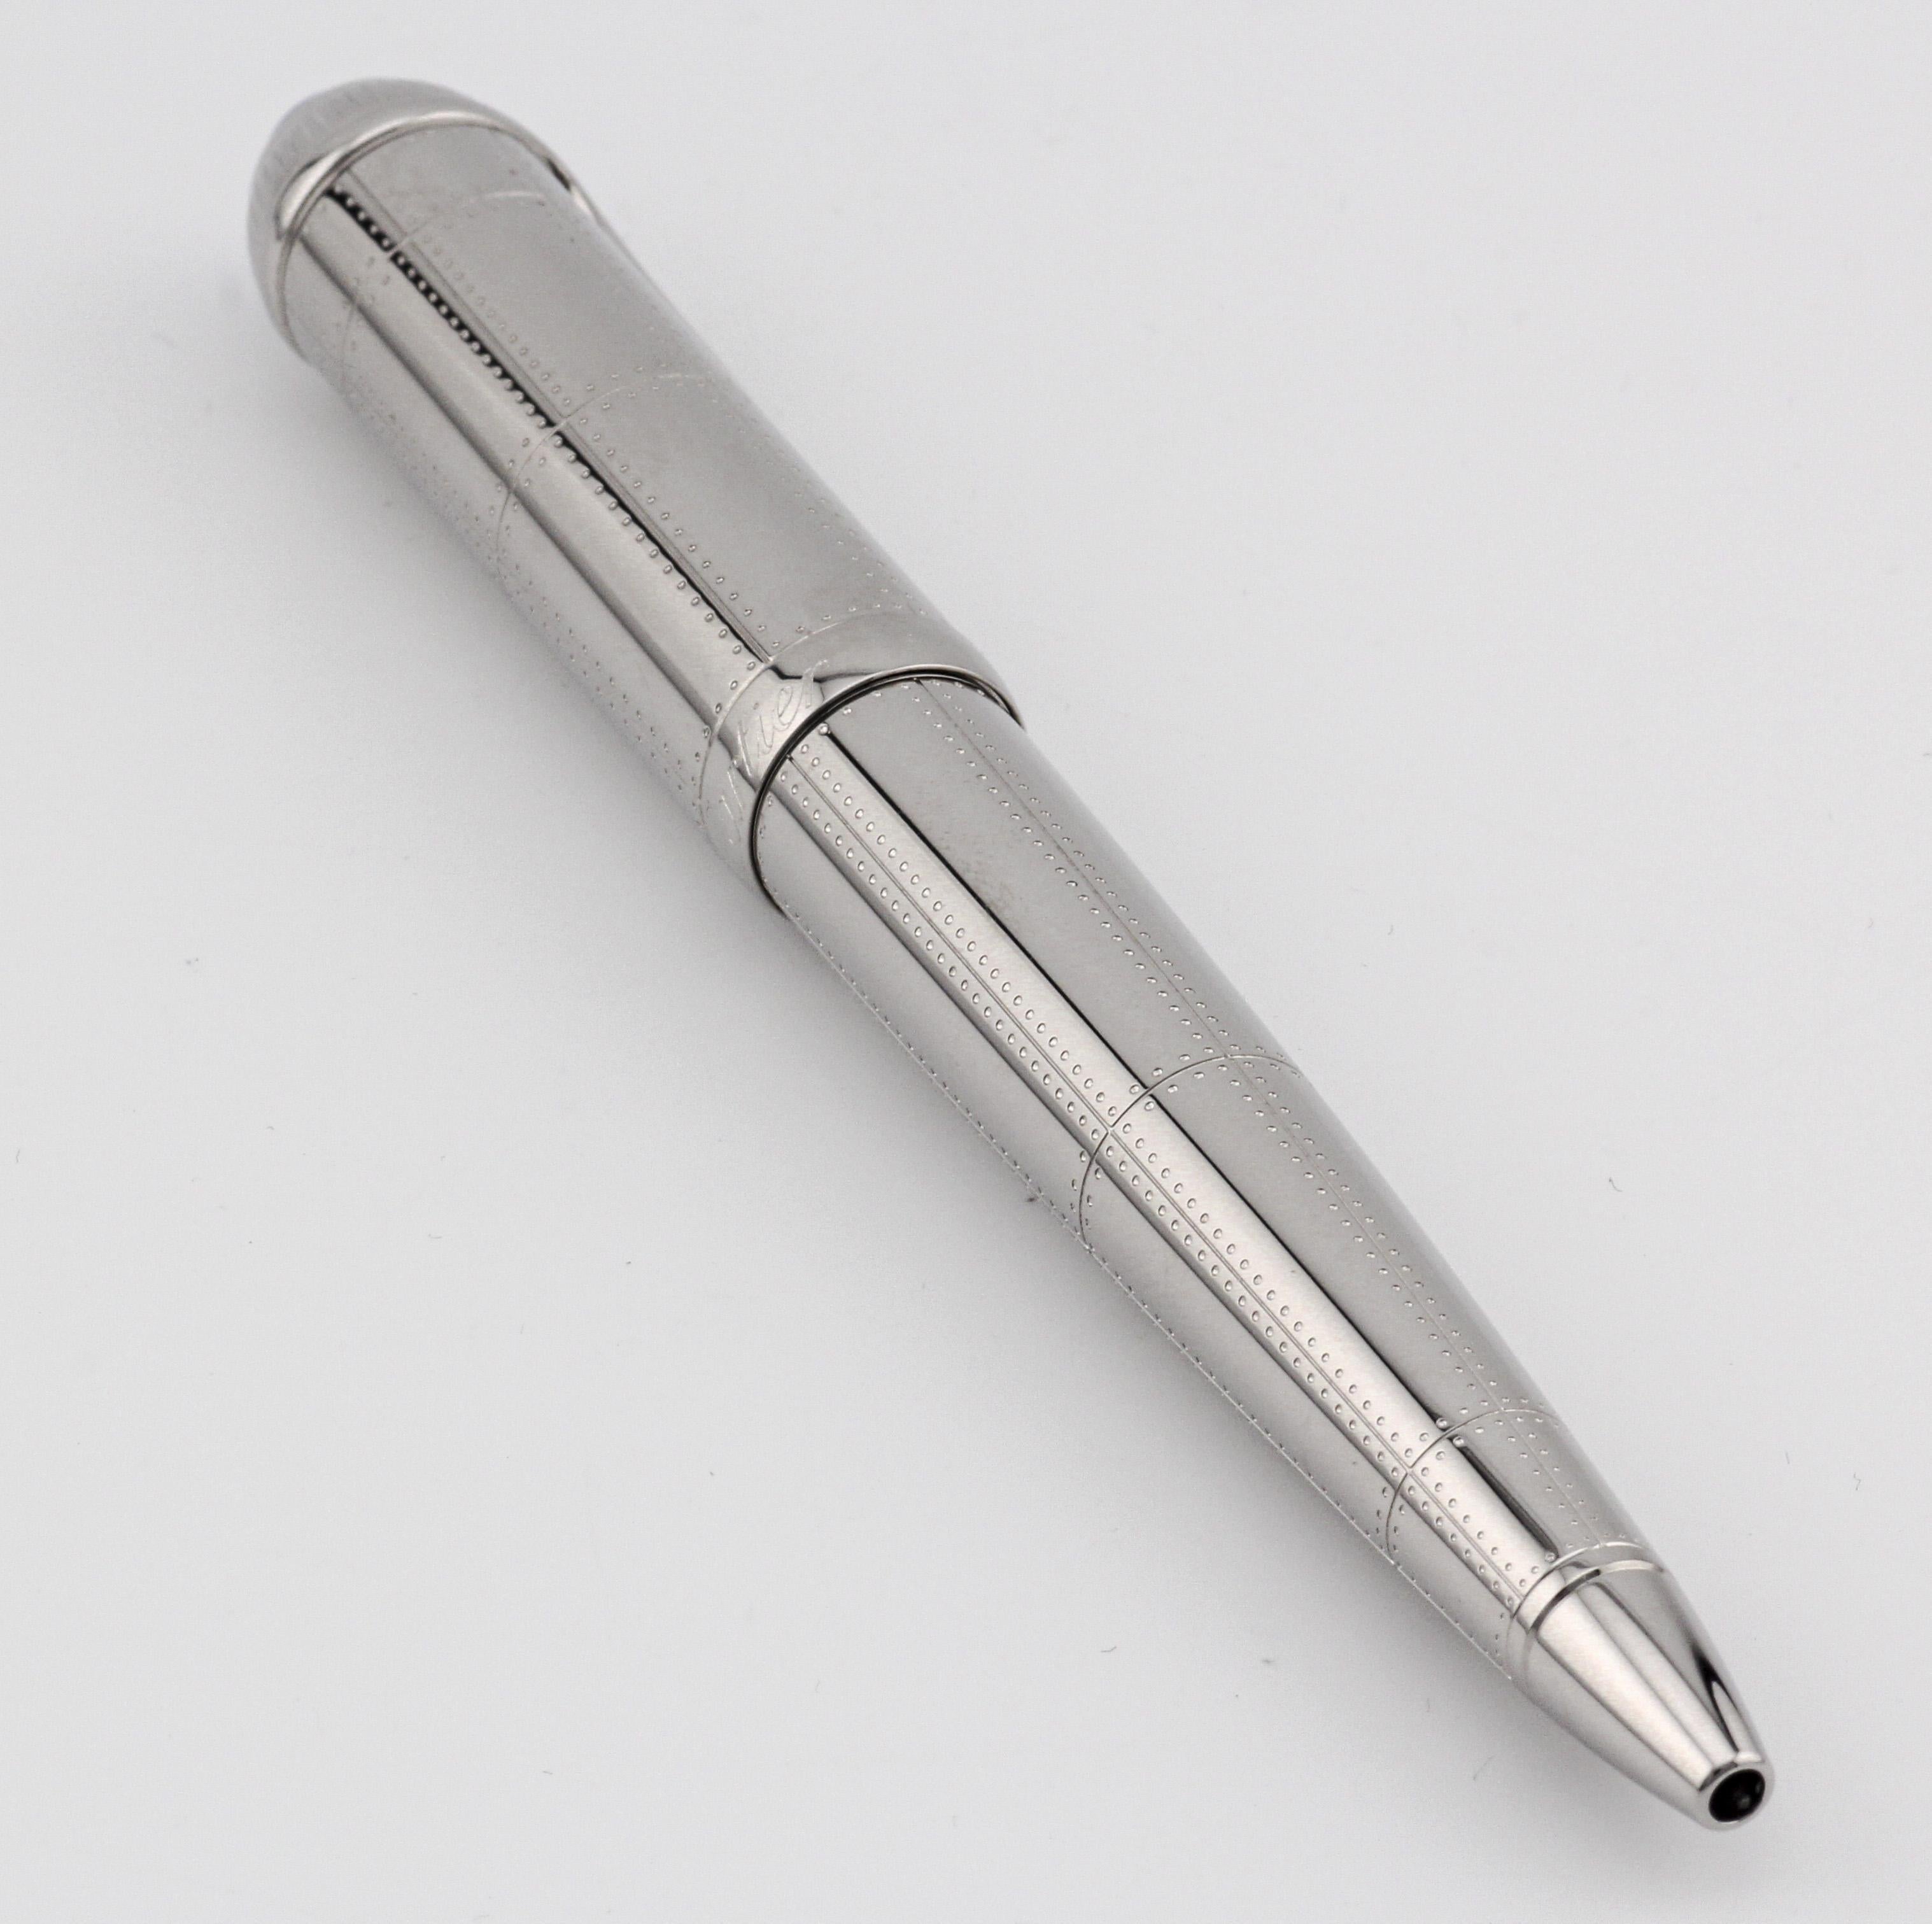 The Cartier Transatlantique R de Cartier Ballpoint Pen offers a harmonious blend of timeless elegance and contemporary sophistication. Crafted with meticulous attention to detail, this exquisite writing instrument showcases Cartier's renowned